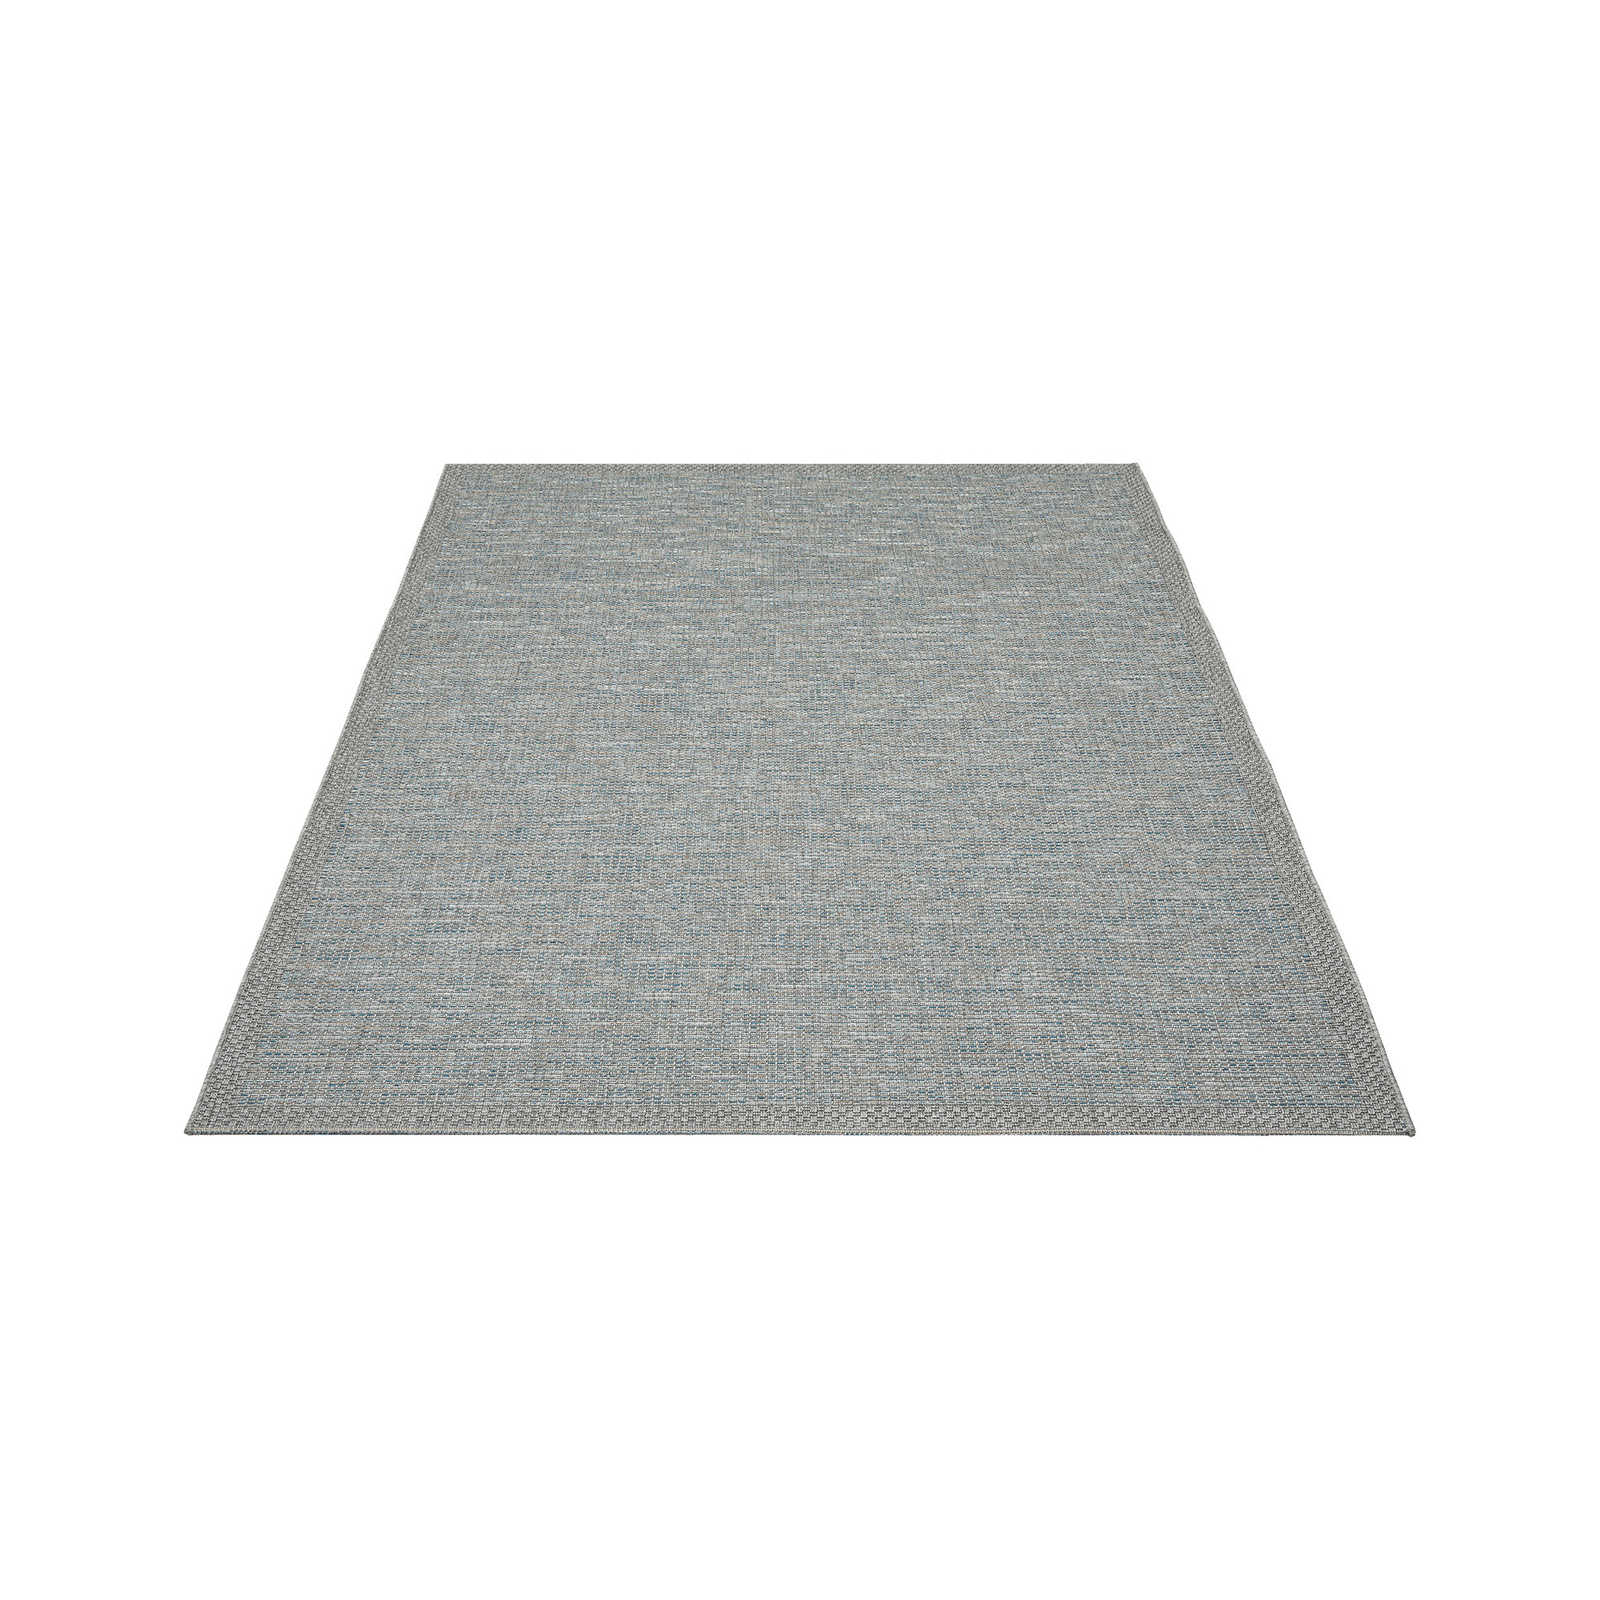 Plain Outdoor Rug in Turquoise - 220 x 160 cm
